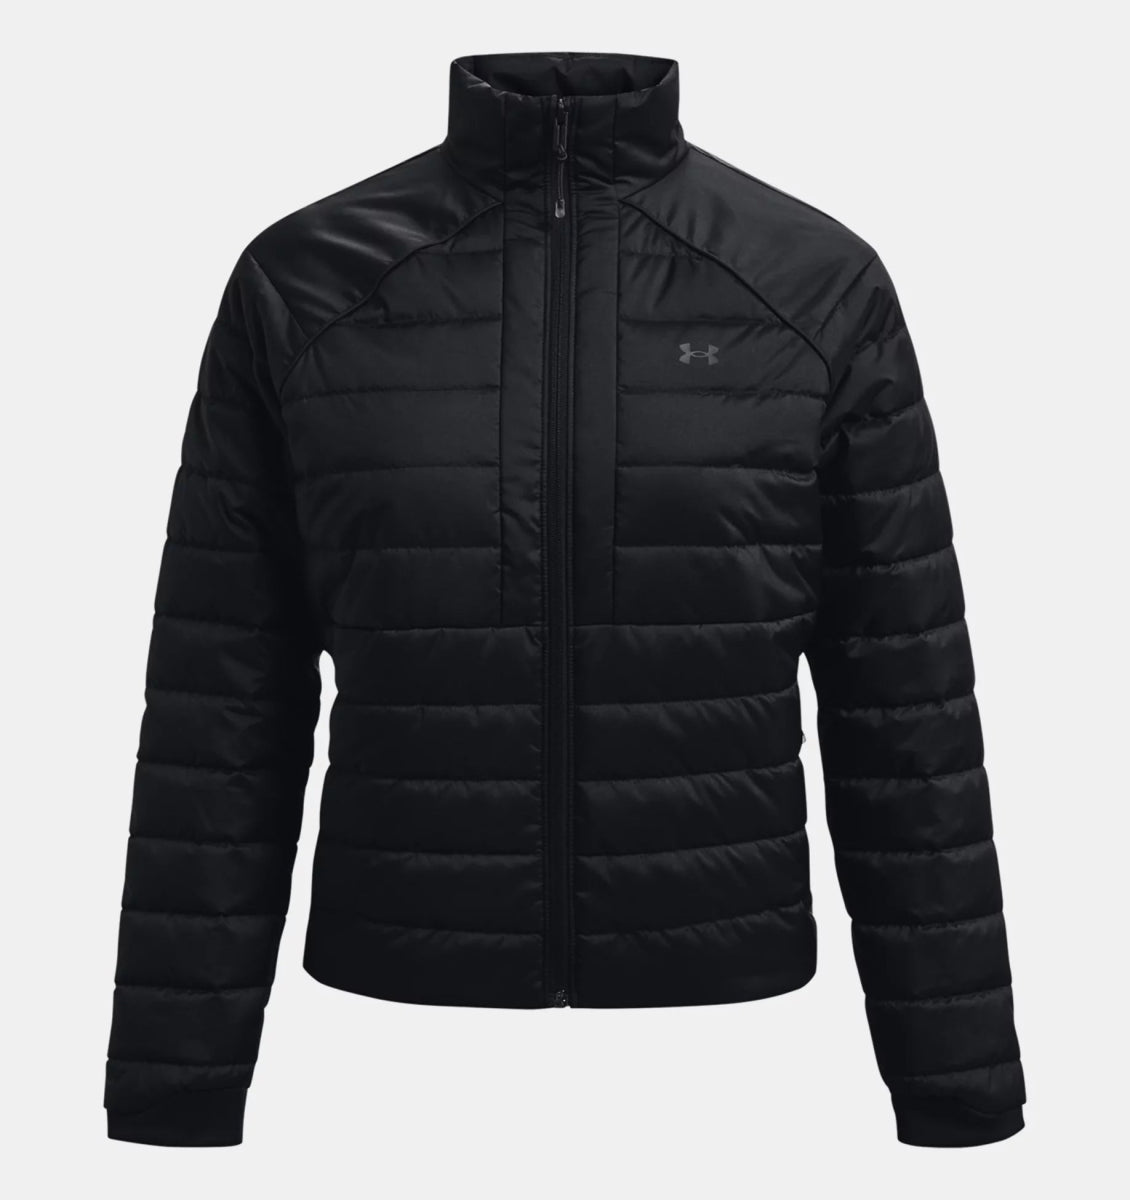 UA Storm Insulated Jacket - The Shoe CollectiveUnder Armour